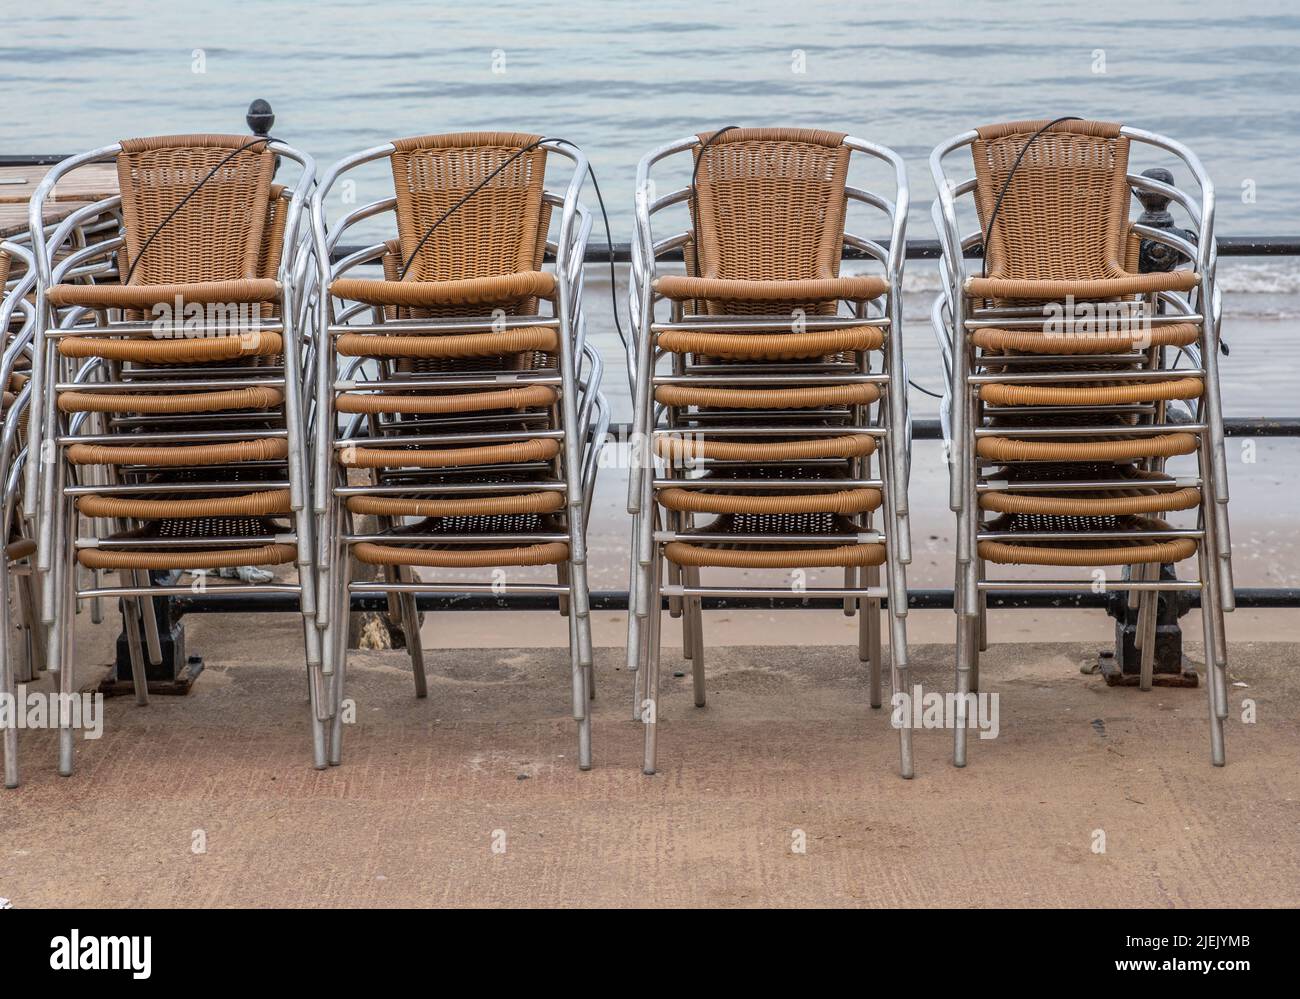 16 June 2022 Scarborough, North Yorkshire, UK - stacks of rattan chairs secured to a metal railing. Stock Photo